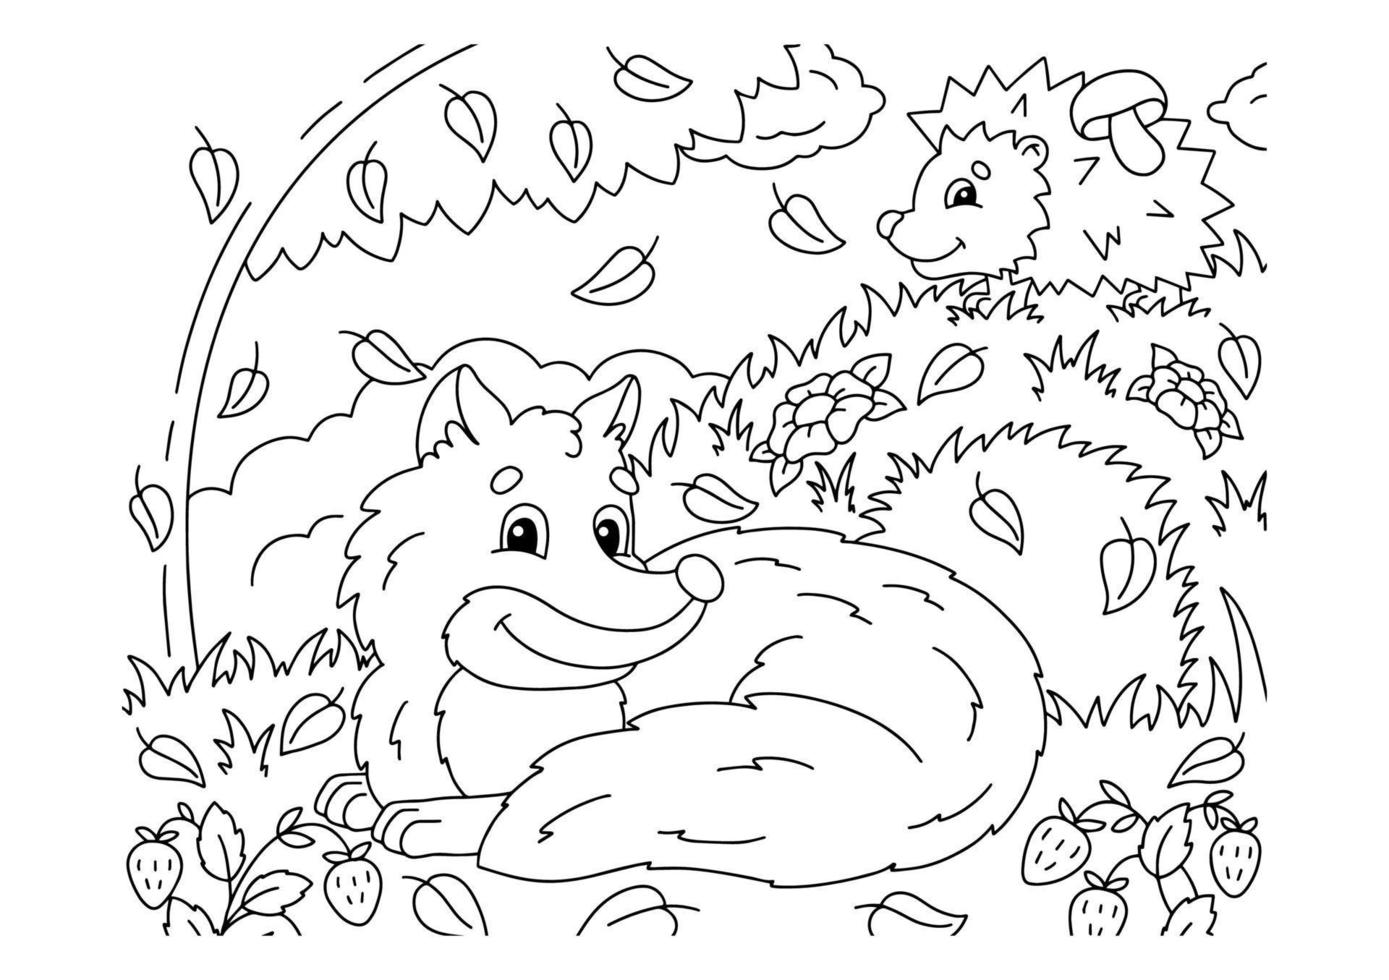 Fox and hedgehog in a forest clearing. Coloring book page for kids. Cartoon style character. Vector illustration isolated on white background.